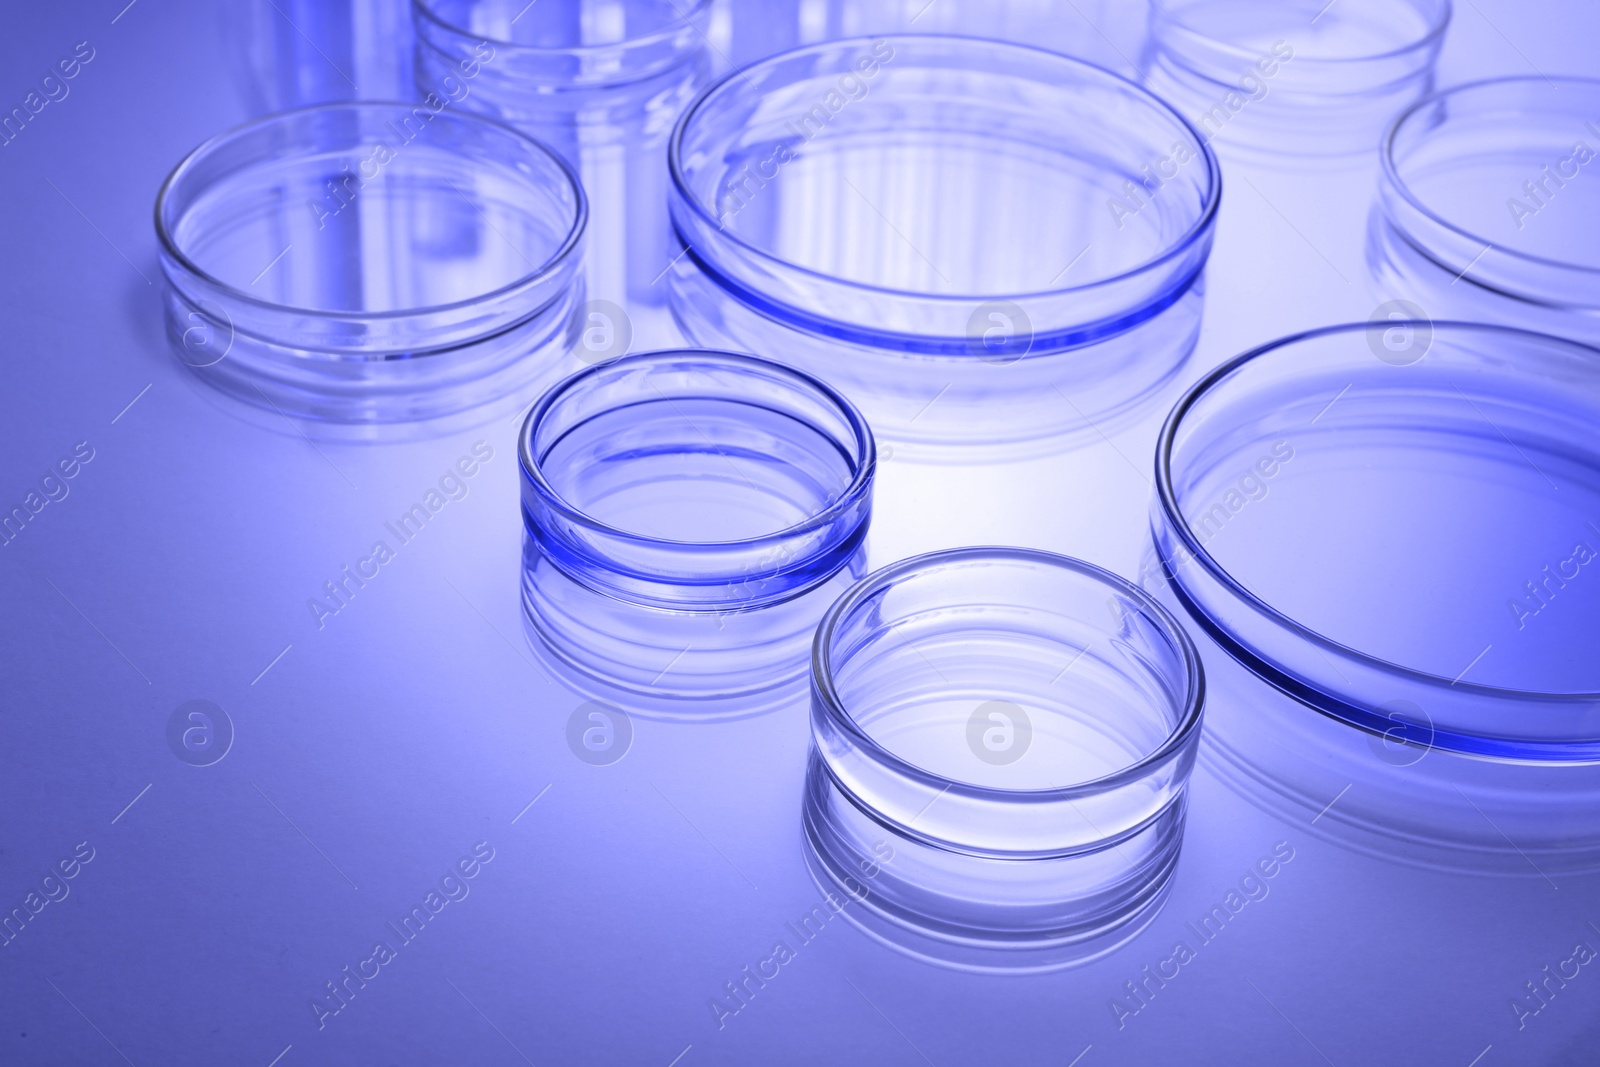 Image of Petri dishes with liquid on table, toned in blue. Laboratory glassware